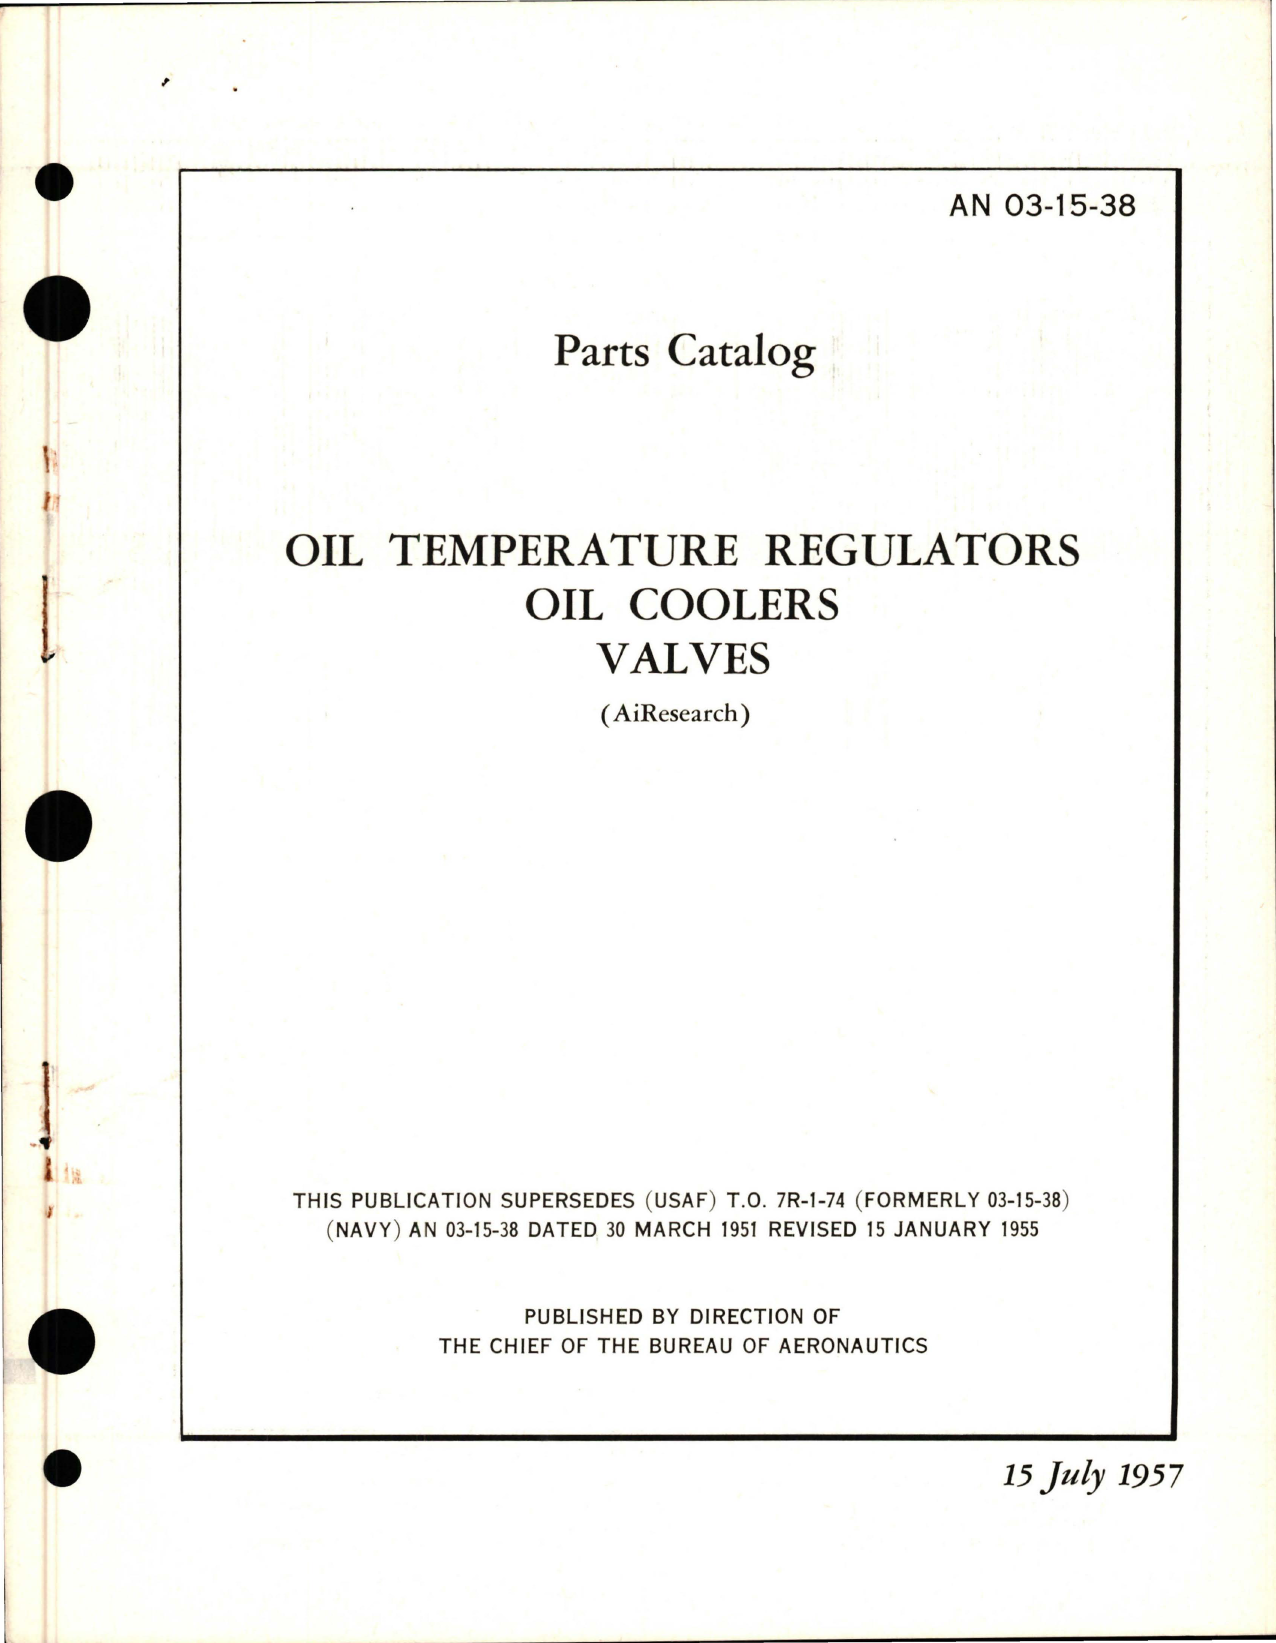 Sample page 1 from AirCorps Library document: Parts Catalog for Oil Temperature Regulators - Oil Coolers - Valves